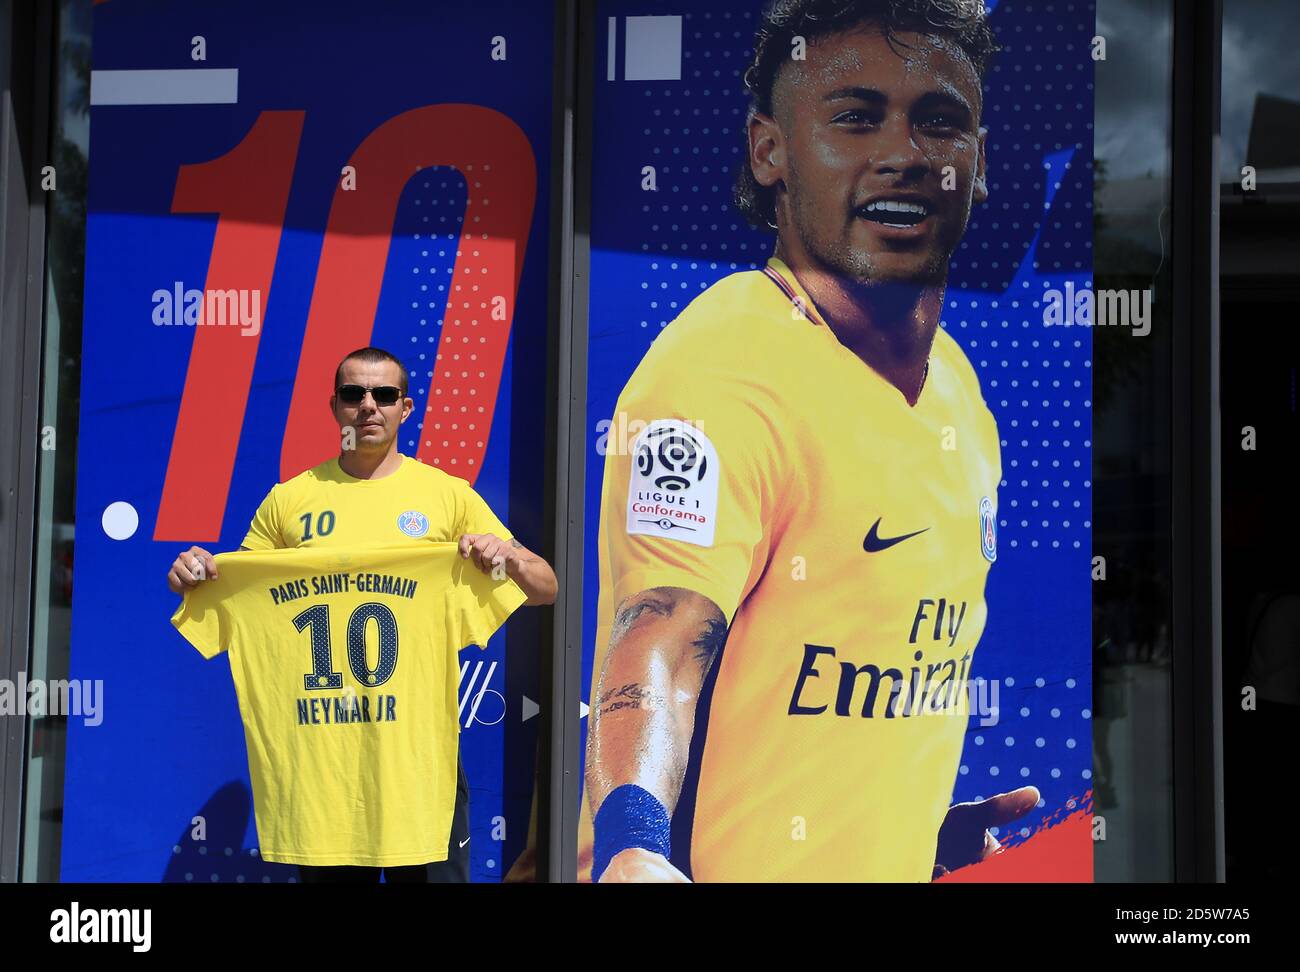 Paris Saint-Germain's fan holding up a shirt with new signing Neymar's name on prior to the match Stock Photo